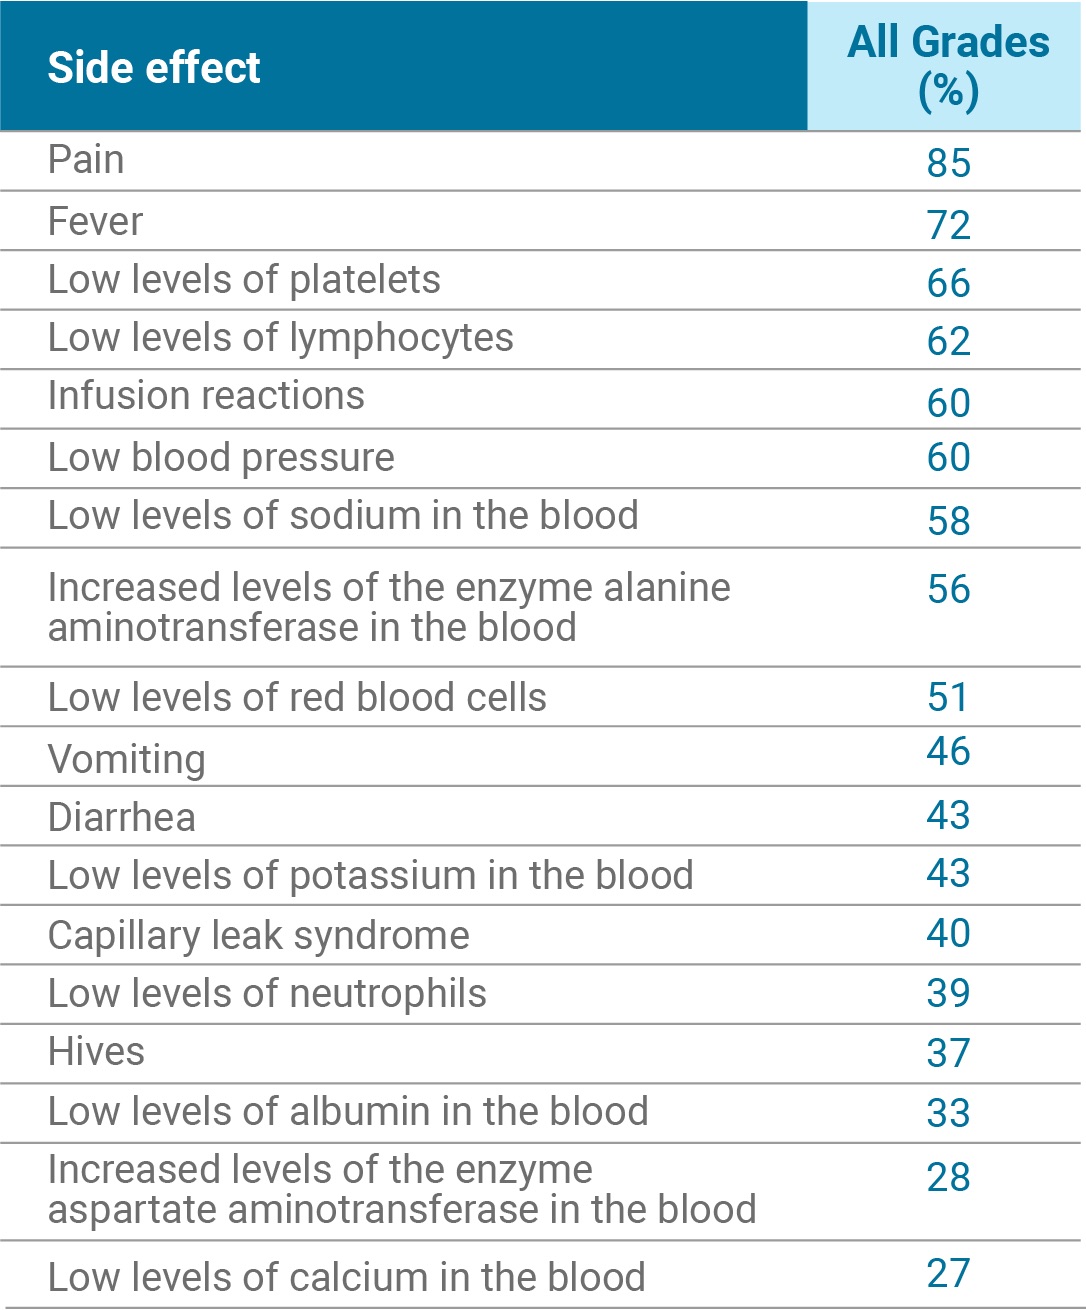 the most common side effects seen in 10% or more of patients taking the antibody therapy regimen